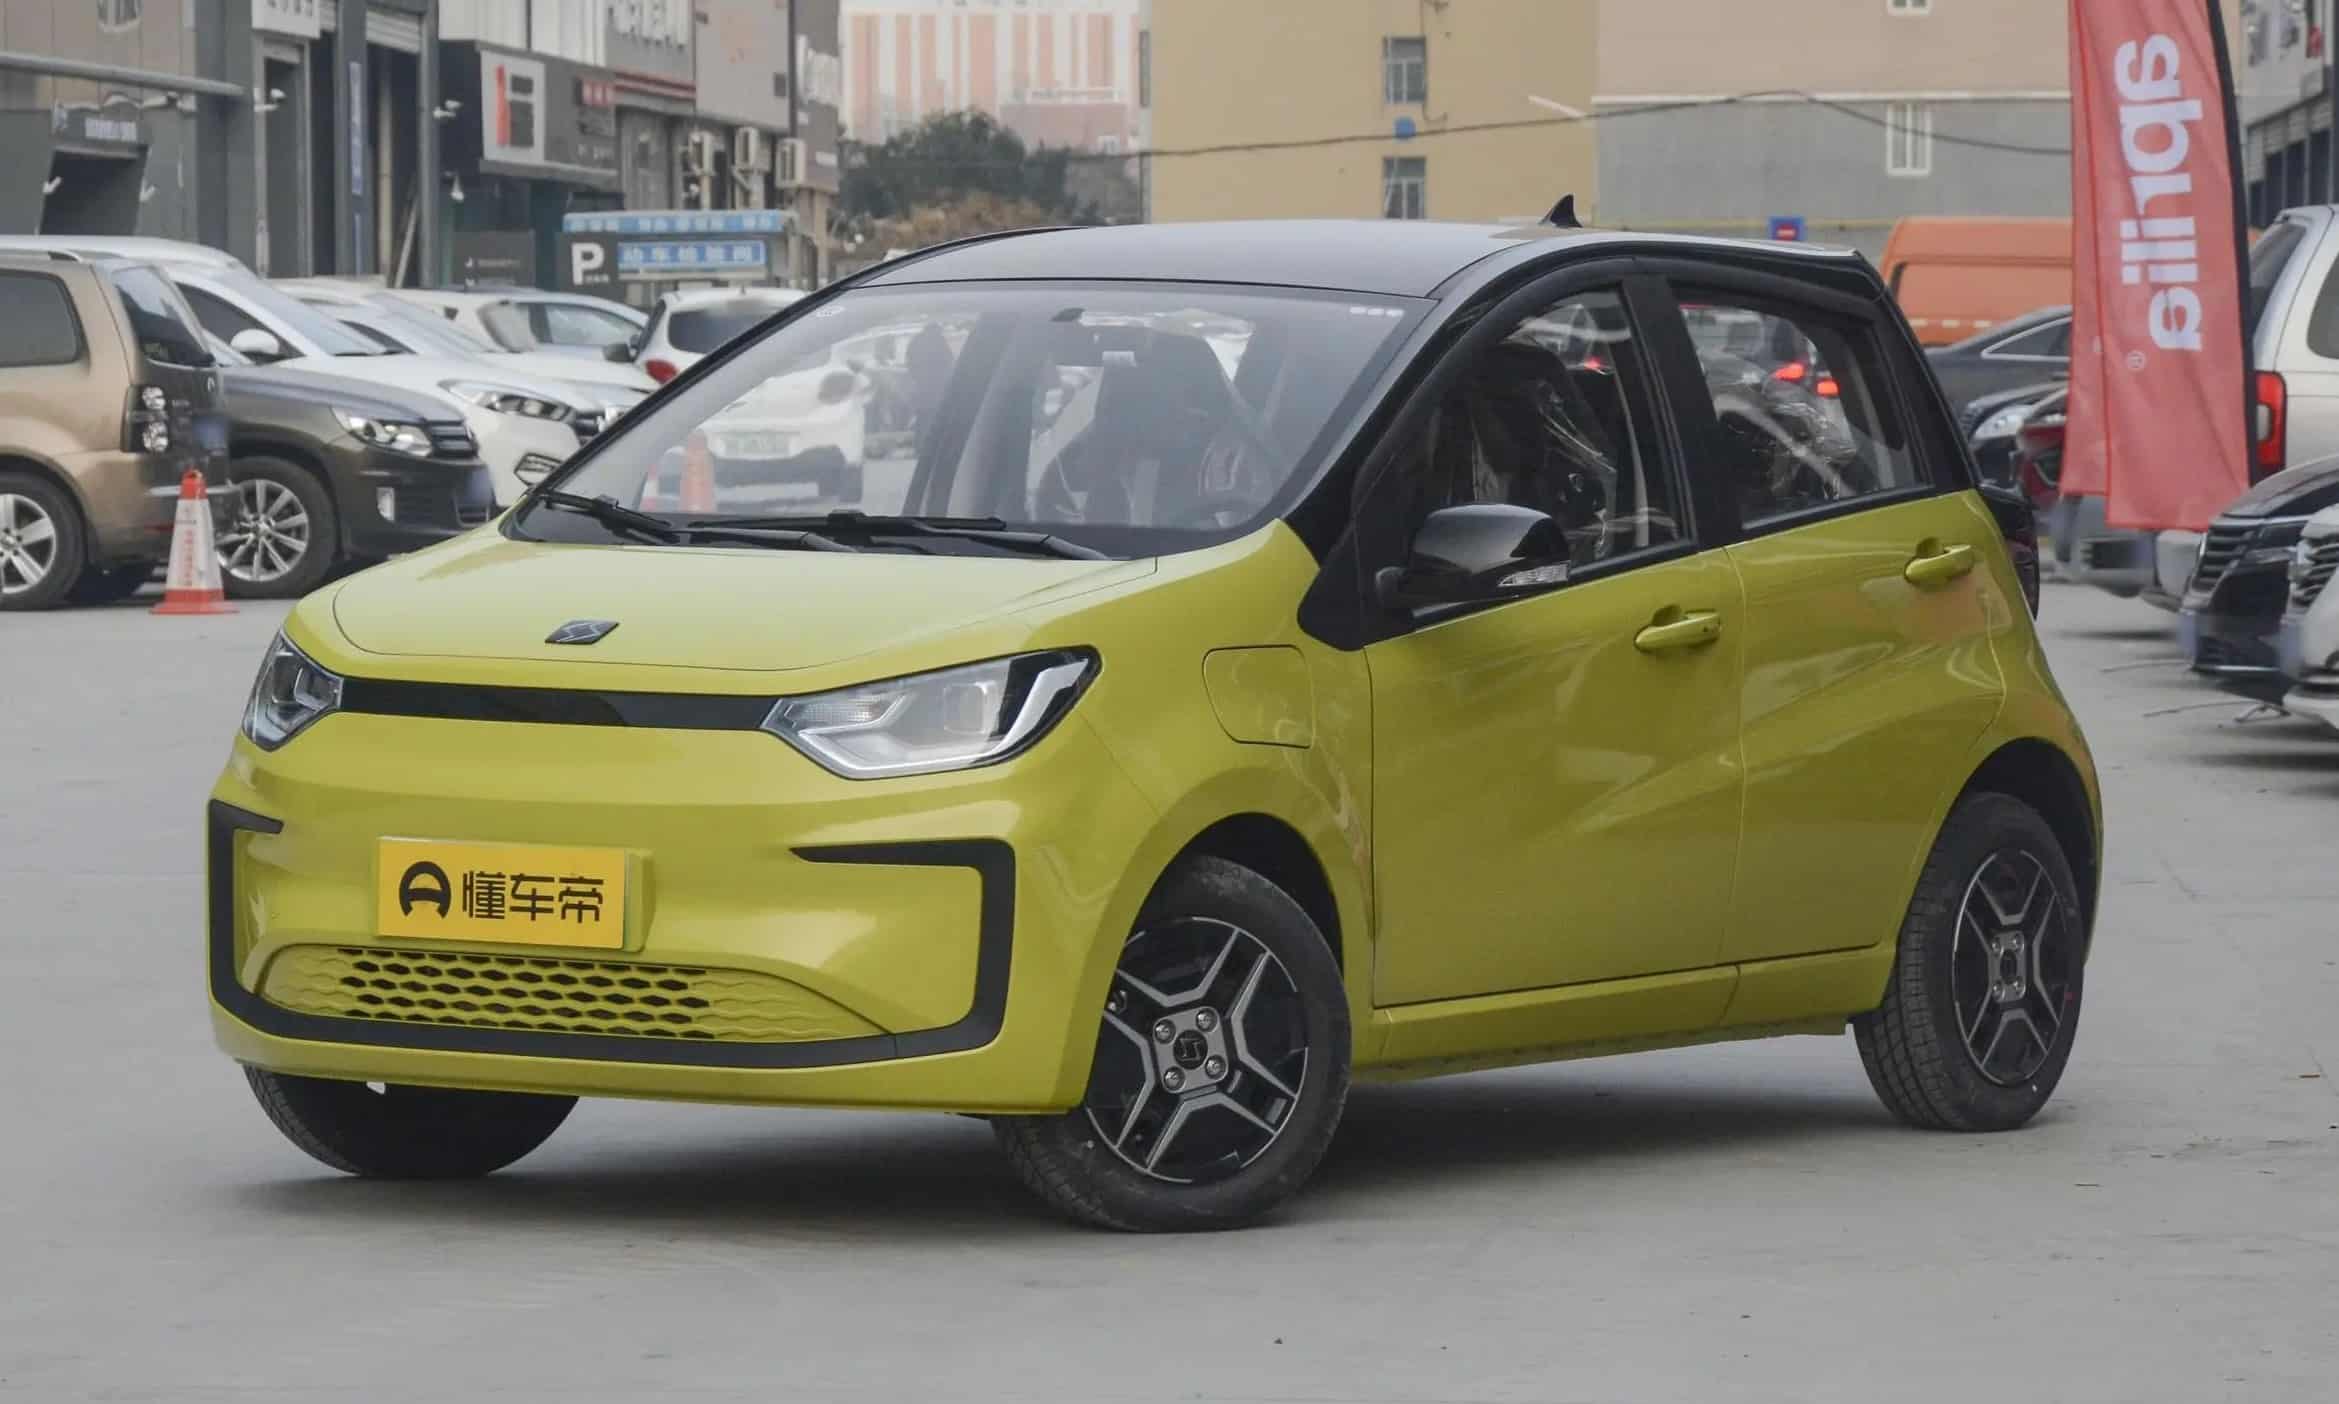 JAC Motors, the Chinese automaker that is part of the Volkswagen group, is set to launch the first mass-produced electric vehicle (EV) with a sodium-ion battery under its new Yiwei brand.  Although sodium-ion battery technology is less dense (and less developed) than lithium-ion, its lower cost, greater supply and superior cold-weather performance could help accelerate the mass adoption of electric vehicles.  CarNewsChina reports that deliveries of the JAC Yiwei EV hatchback will begin in January.  Yiwei is a new brand for JAC in 2023.  Volkswagen has a 75 percent stake in (and management control of) JAC and owns 50 percent of JAC's parent company, Anhui Jianghuai Automobile Group Holdings (JAG).  The Chinese government owns the other half of JAG, making for one of the oddest pairings in the auto industry.